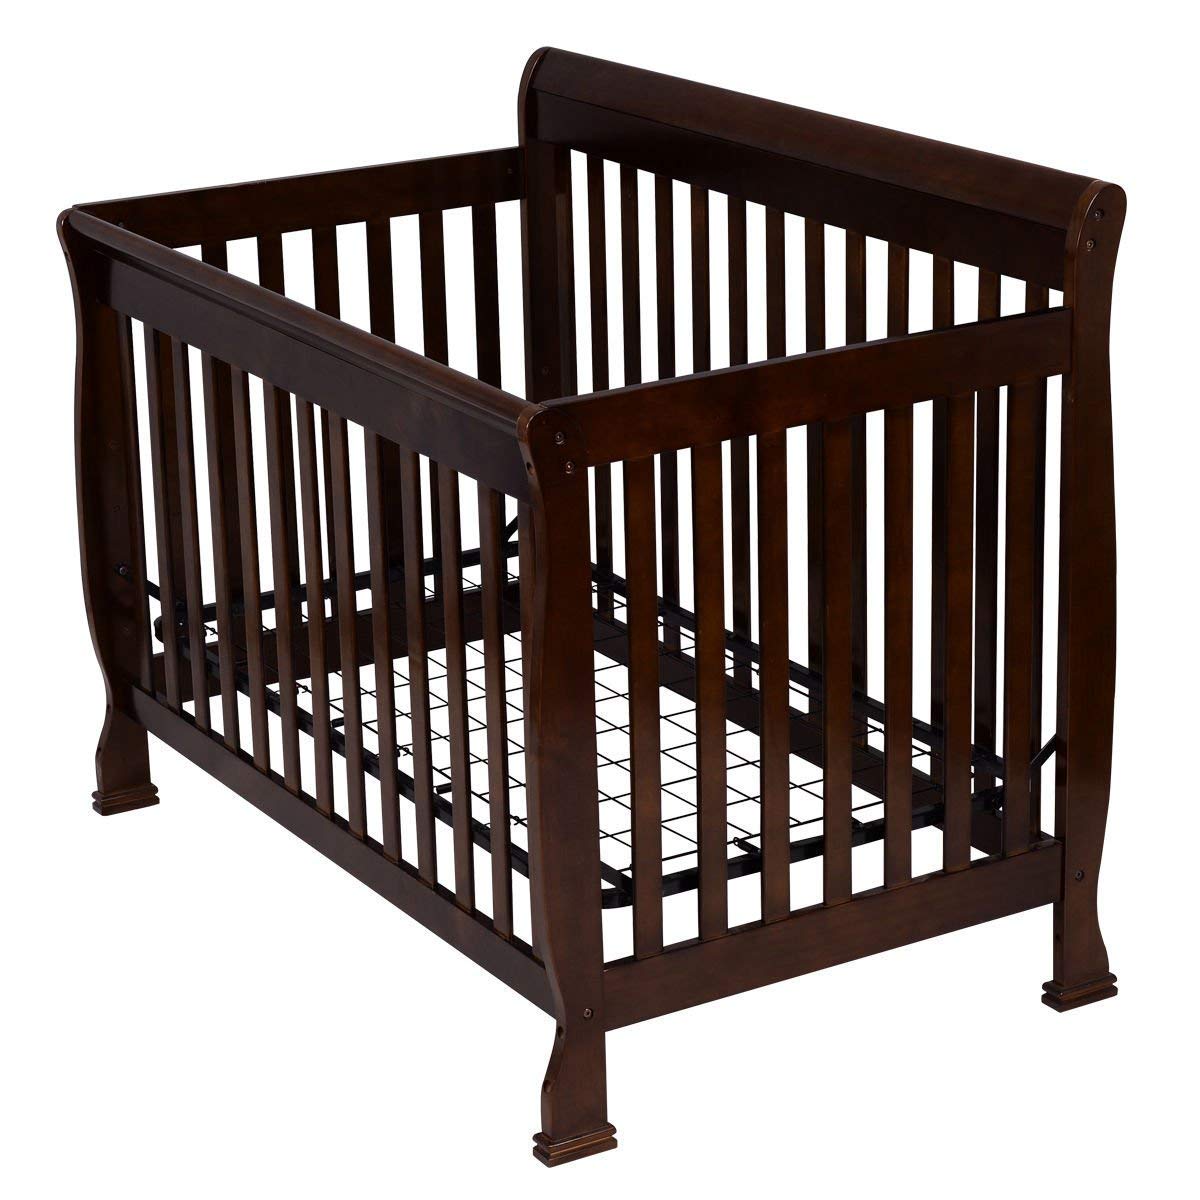 Costzon Baby Convertible Crib, Solid Wood Construction Toddler Nursery Bed (Dark Chocolate) , 53.5"(L) X 32"(W) X 41"(H)